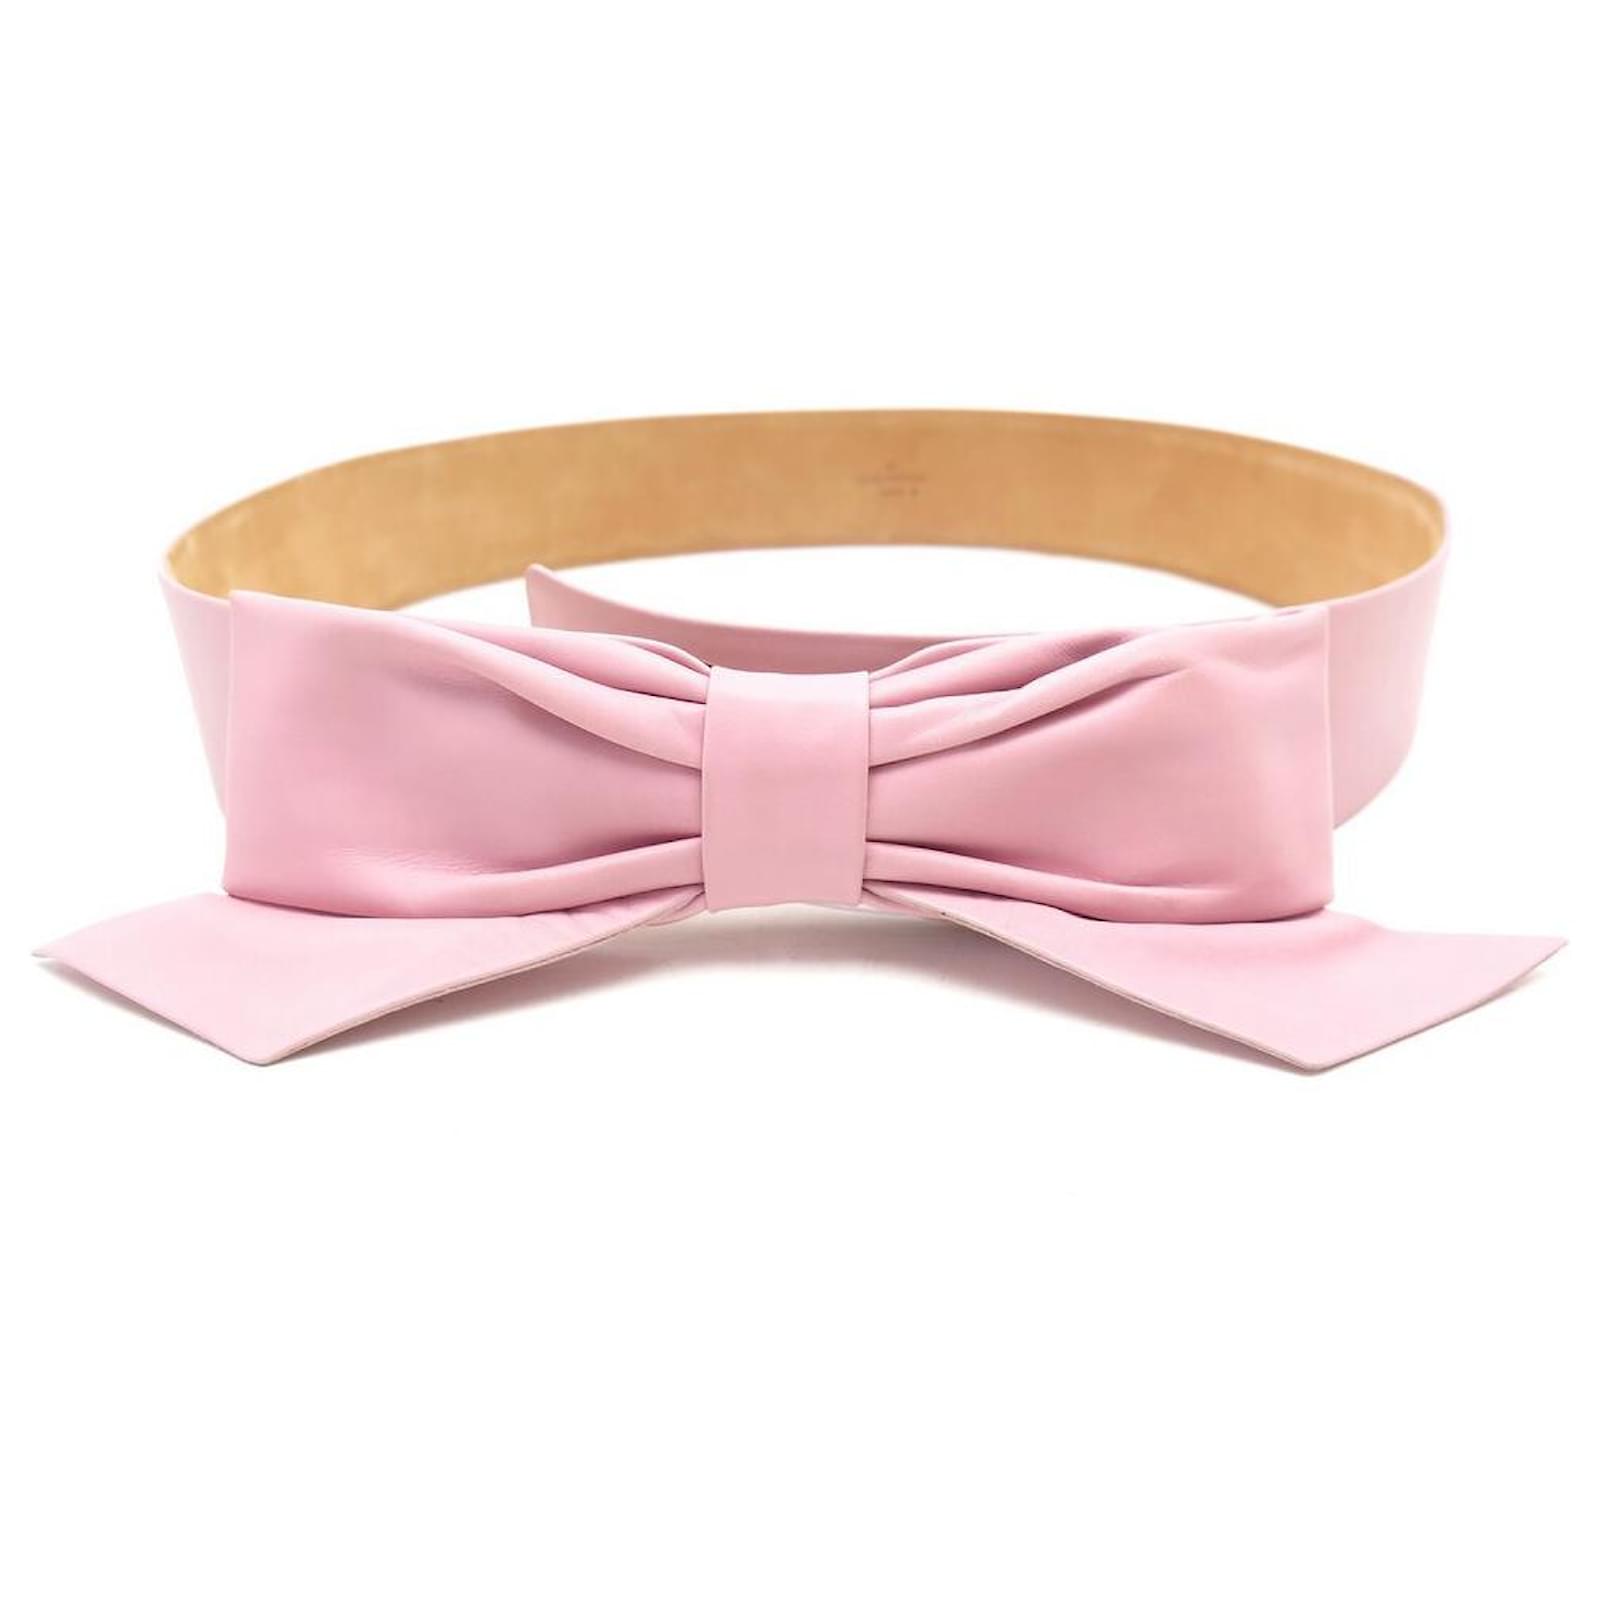 NEW BELT LOUIS VUITTON PINK BOW GM LEATHER T80 CM PINK LEATHER